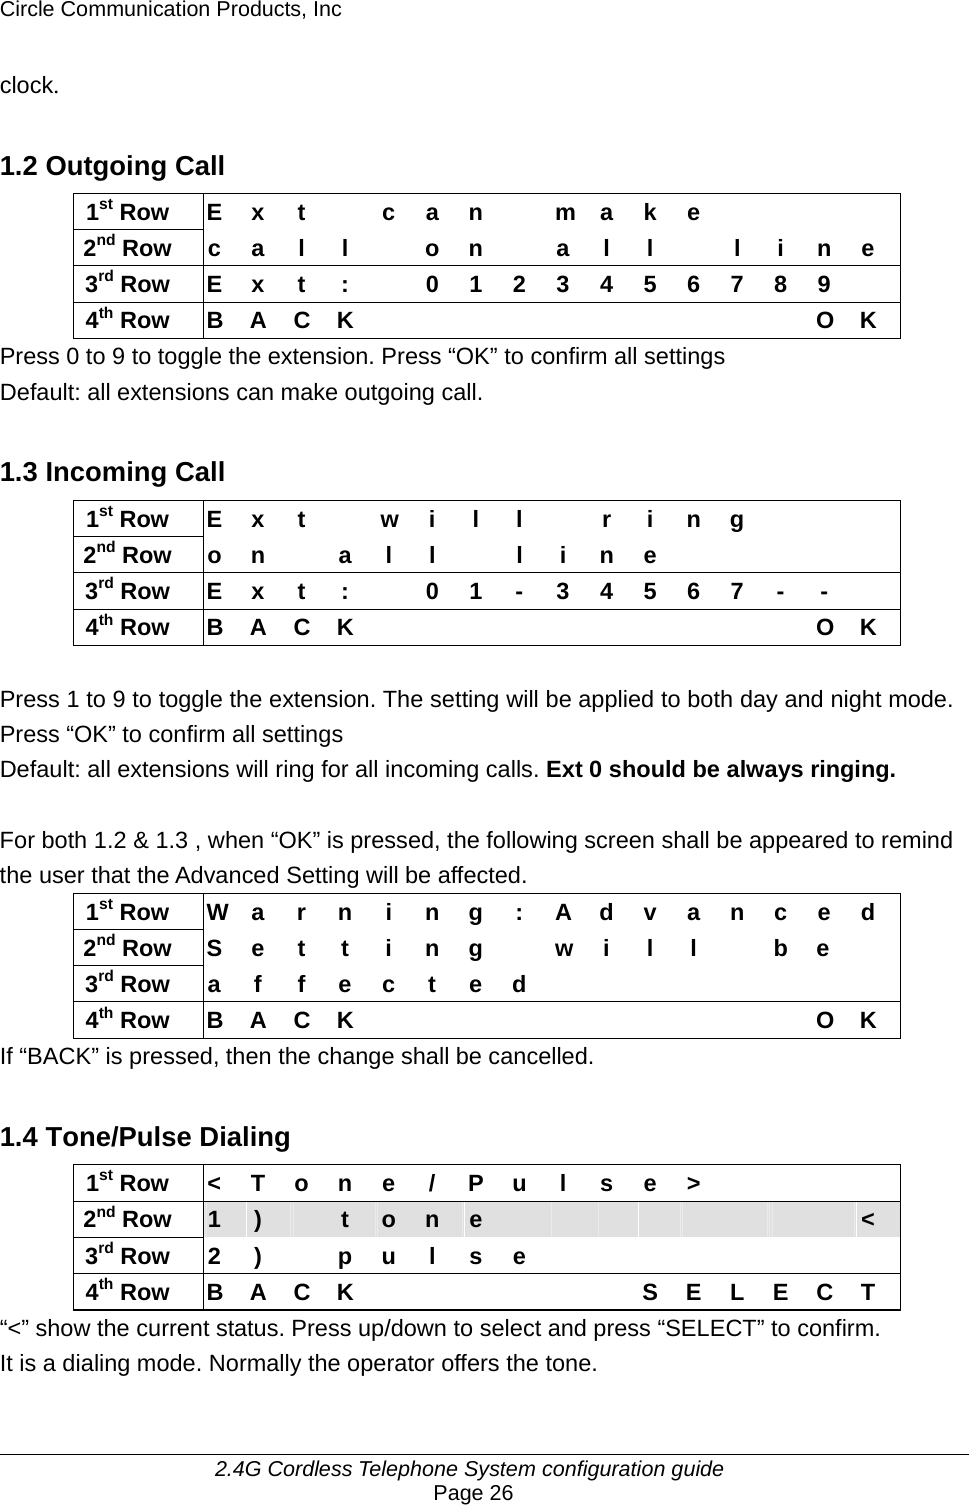 Circle Communication Products, Inc     2.4G Cordless Telephone System configuration guide Page 26 clock.  1.2 Outgoing Call 1st Row  E x t    c a n    m a k e         2nd Row c a l l  o n  a l l  l i n e 3rd Row  E x t  :    0 1 2 3 4 5 6 7 8 9   4th Row B A C K           O K Press 0 to 9 to toggle the extension. Press “OK” to confirm all settings Default: all extensions can make outgoing call.  1.3 Incoming Call 1st Row E x t   w i l l   r i n g      2nd Row o n  a l l  l i n e          3rd Row E x t :    0 1 - 3 4 5 6 7 - -   4th Row B A C K           O K  Press 1 to 9 to toggle the extension. The setting will be applied to both day and night mode. Press “OK” to confirm all settings Default: all extensions will ring for all incoming calls. Ext 0 should be always ringing.  For both 1.2 &amp; 1.3 , when “OK” is pressed, the following screen shall be appeared to remind the user that the Advanced Setting will be affected. 1st Row  W a r n i n g : A d v a n c e d 2nd Row S e t t i n g  w i l l   b e  3rd Row a f f e c t e d         4th Row B A C K           O K If “BACK” is pressed, then the change shall be cancelled.  1.4 Tone/Pulse Dialing 1st Row  &lt; T o n e  / P u l  s e &gt;         2nd Row  1  )   t  o  n  e                  &lt; 3rd Row 2 )  p u l s e         4th Row B A C K       S E L E C T “&lt;” show the current status. Press up/down to select and press “SELECT” to confirm. It is a dialing mode. Normally the operator offers the tone.  